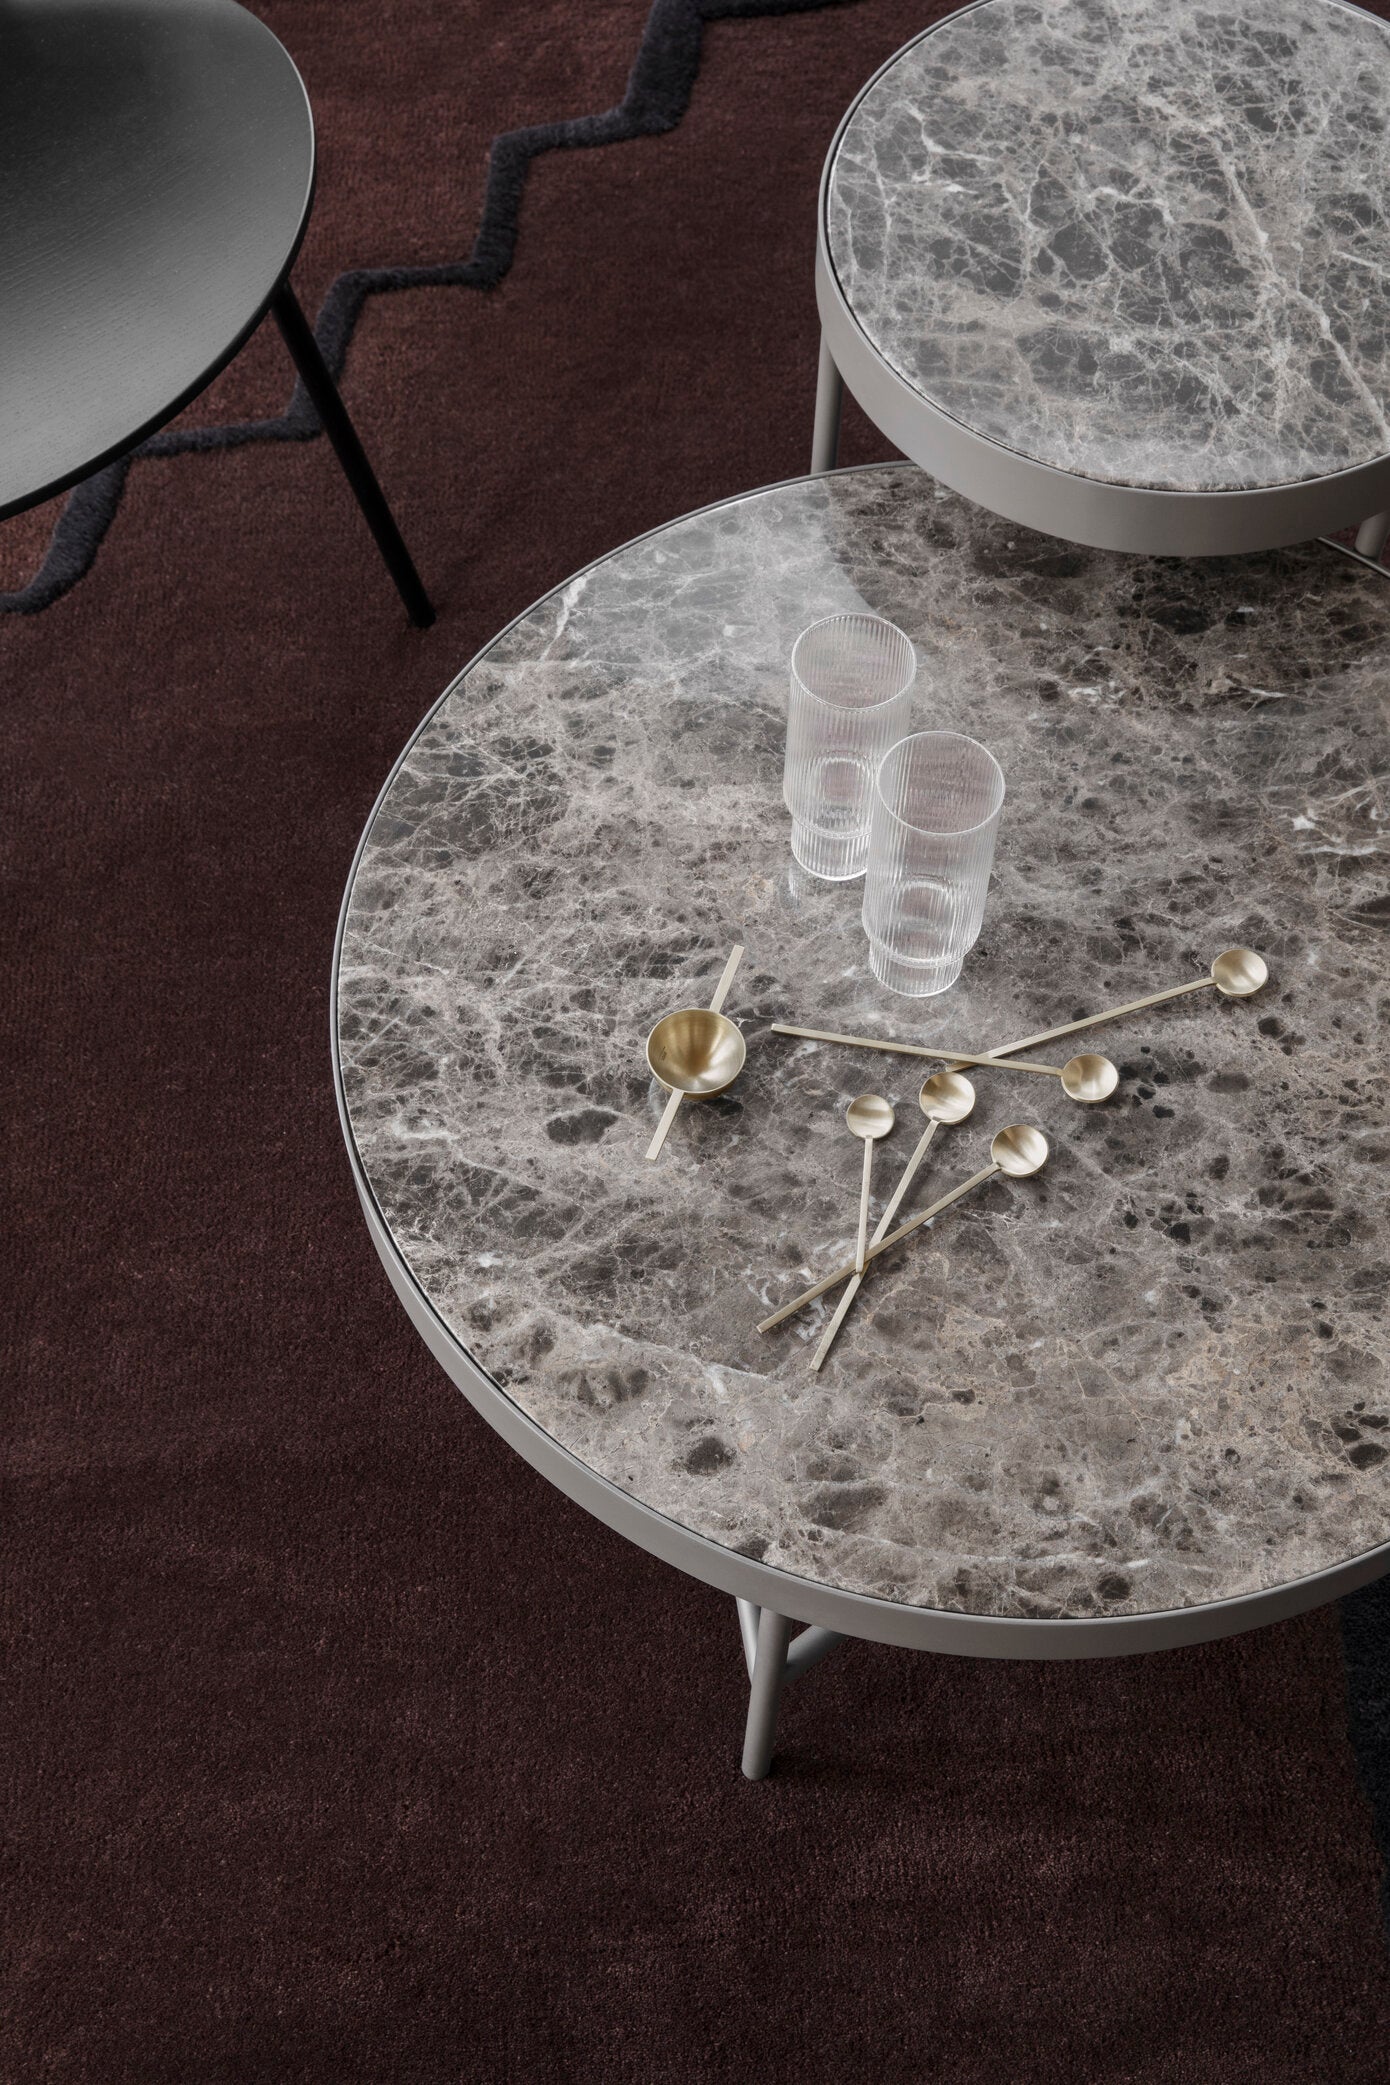 Marble Coffee Tables (Large) by ferm LIVING